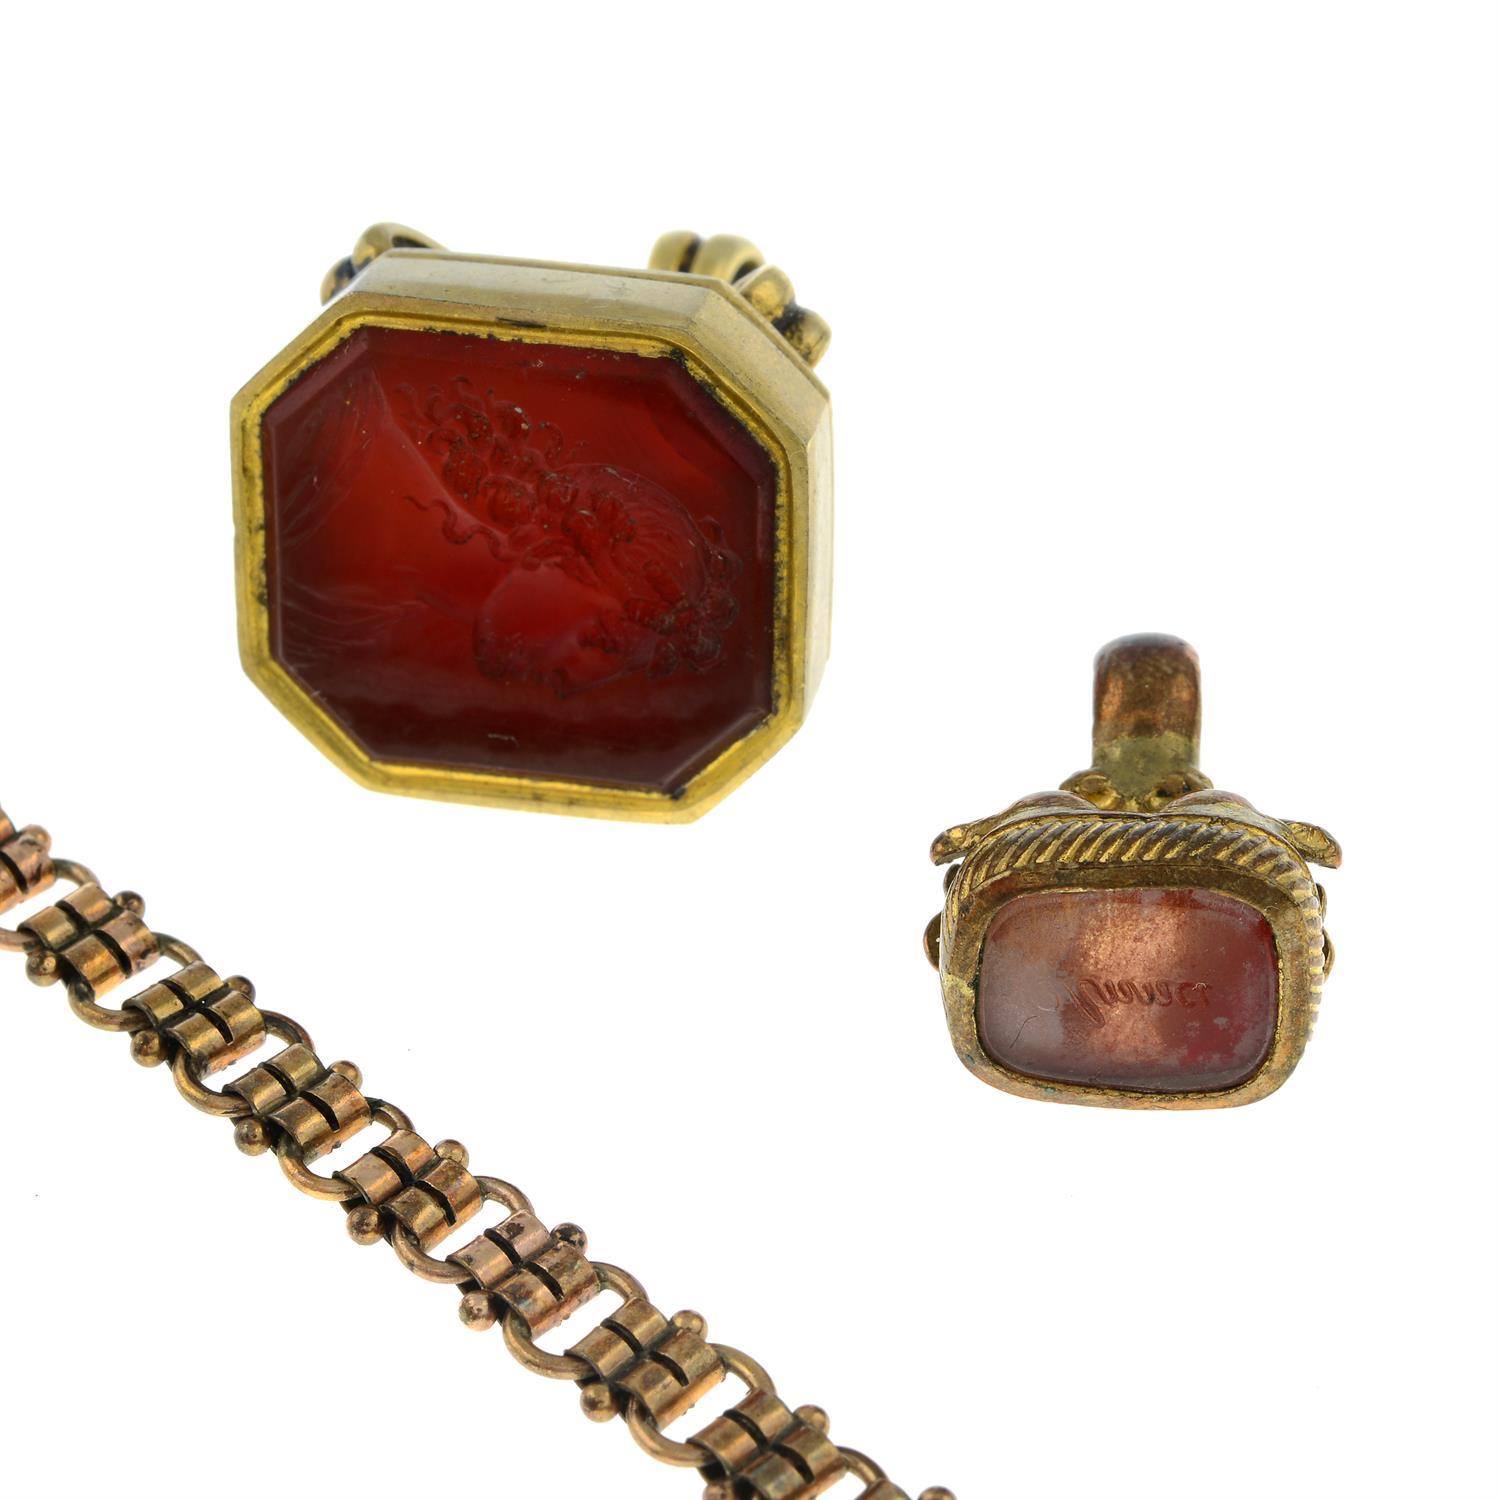 Four items of late Victorian jewellery, to include two carved seal fobs, a longuard chain and a - Image 2 of 3